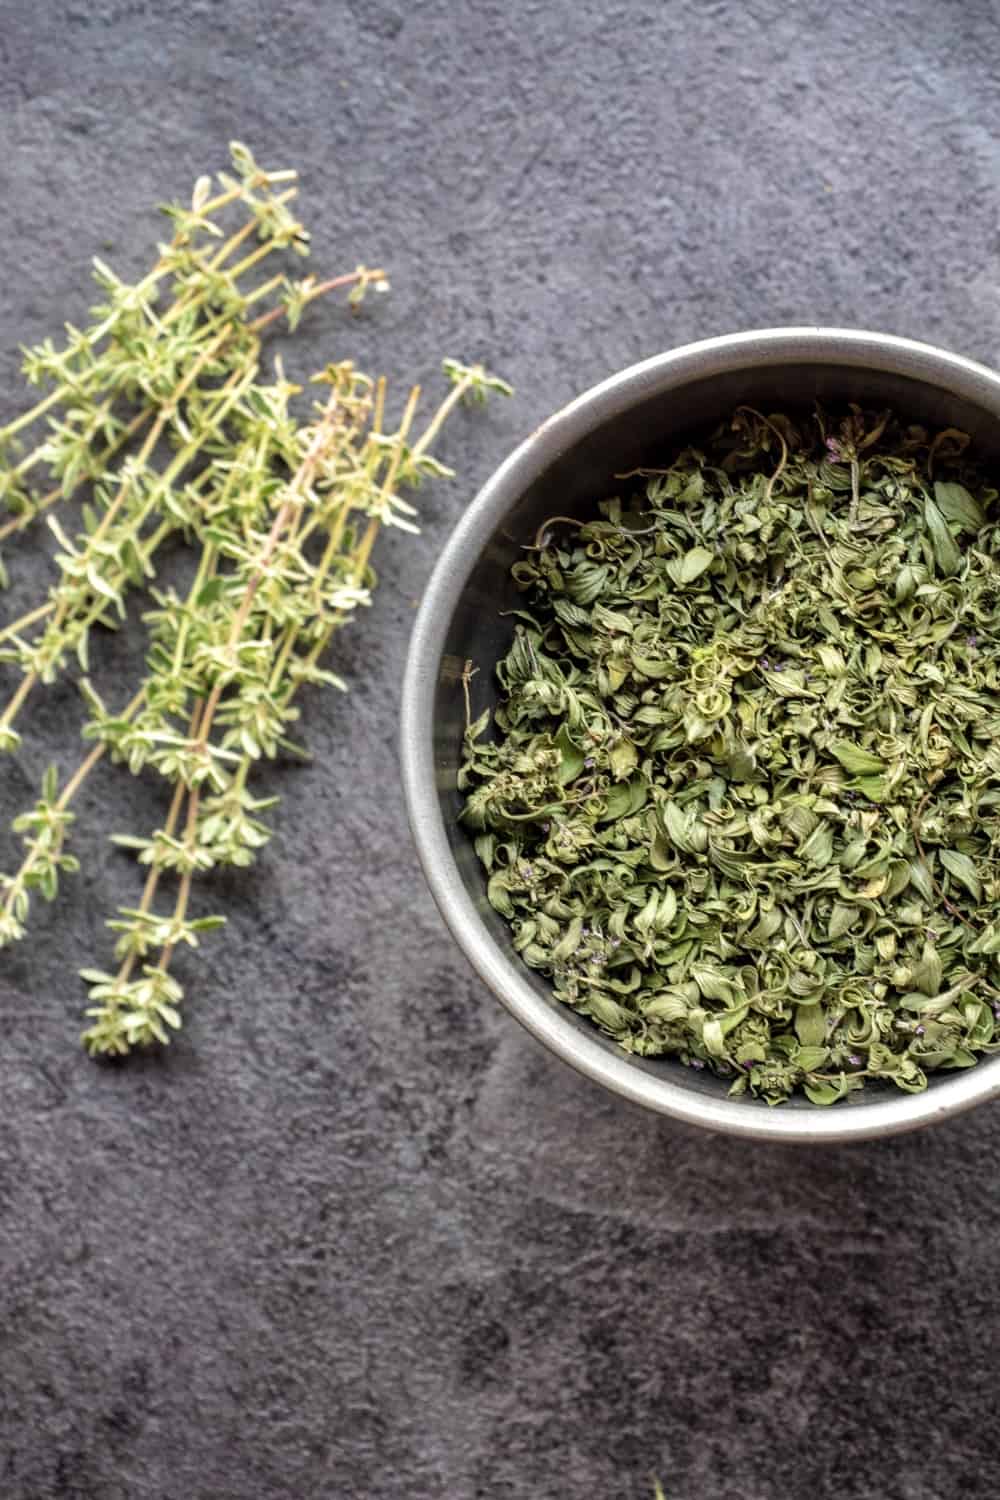 Dry thyme in the bowl